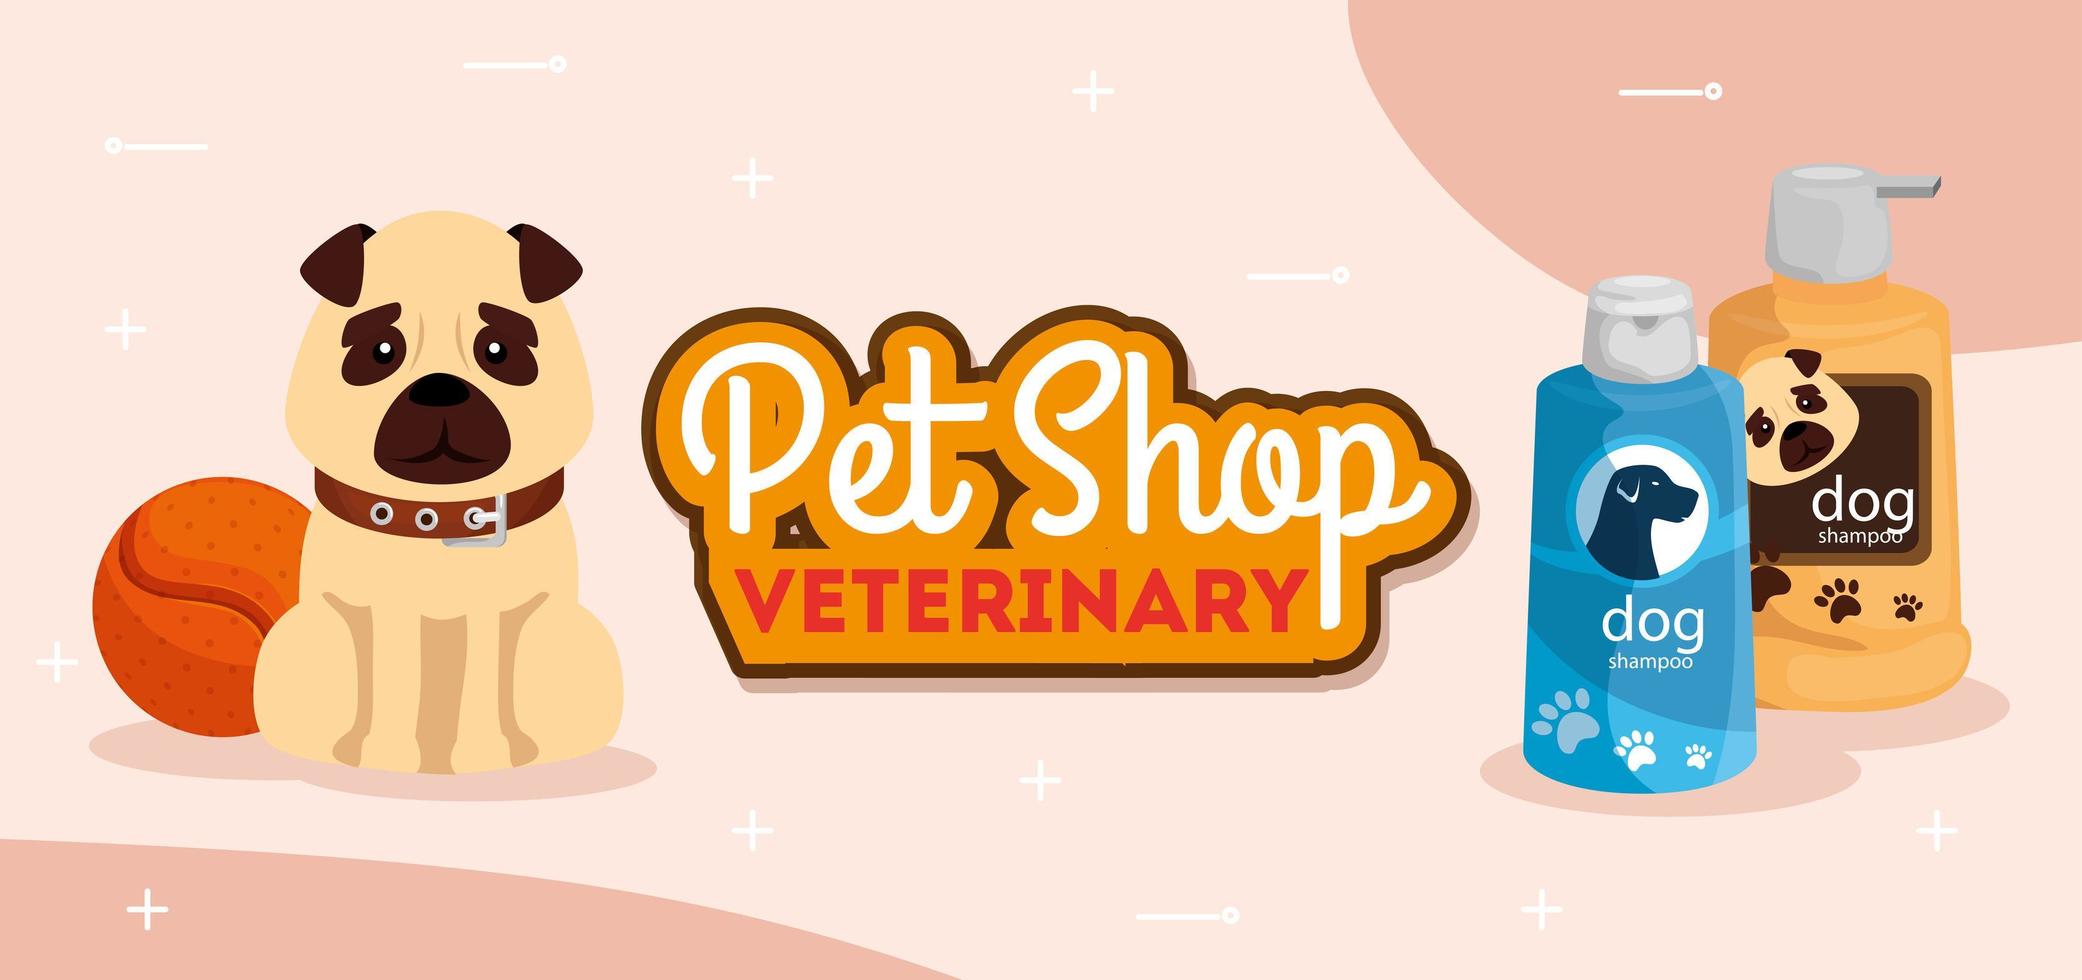 pet shop veterinary with cute dog and care bottles vector